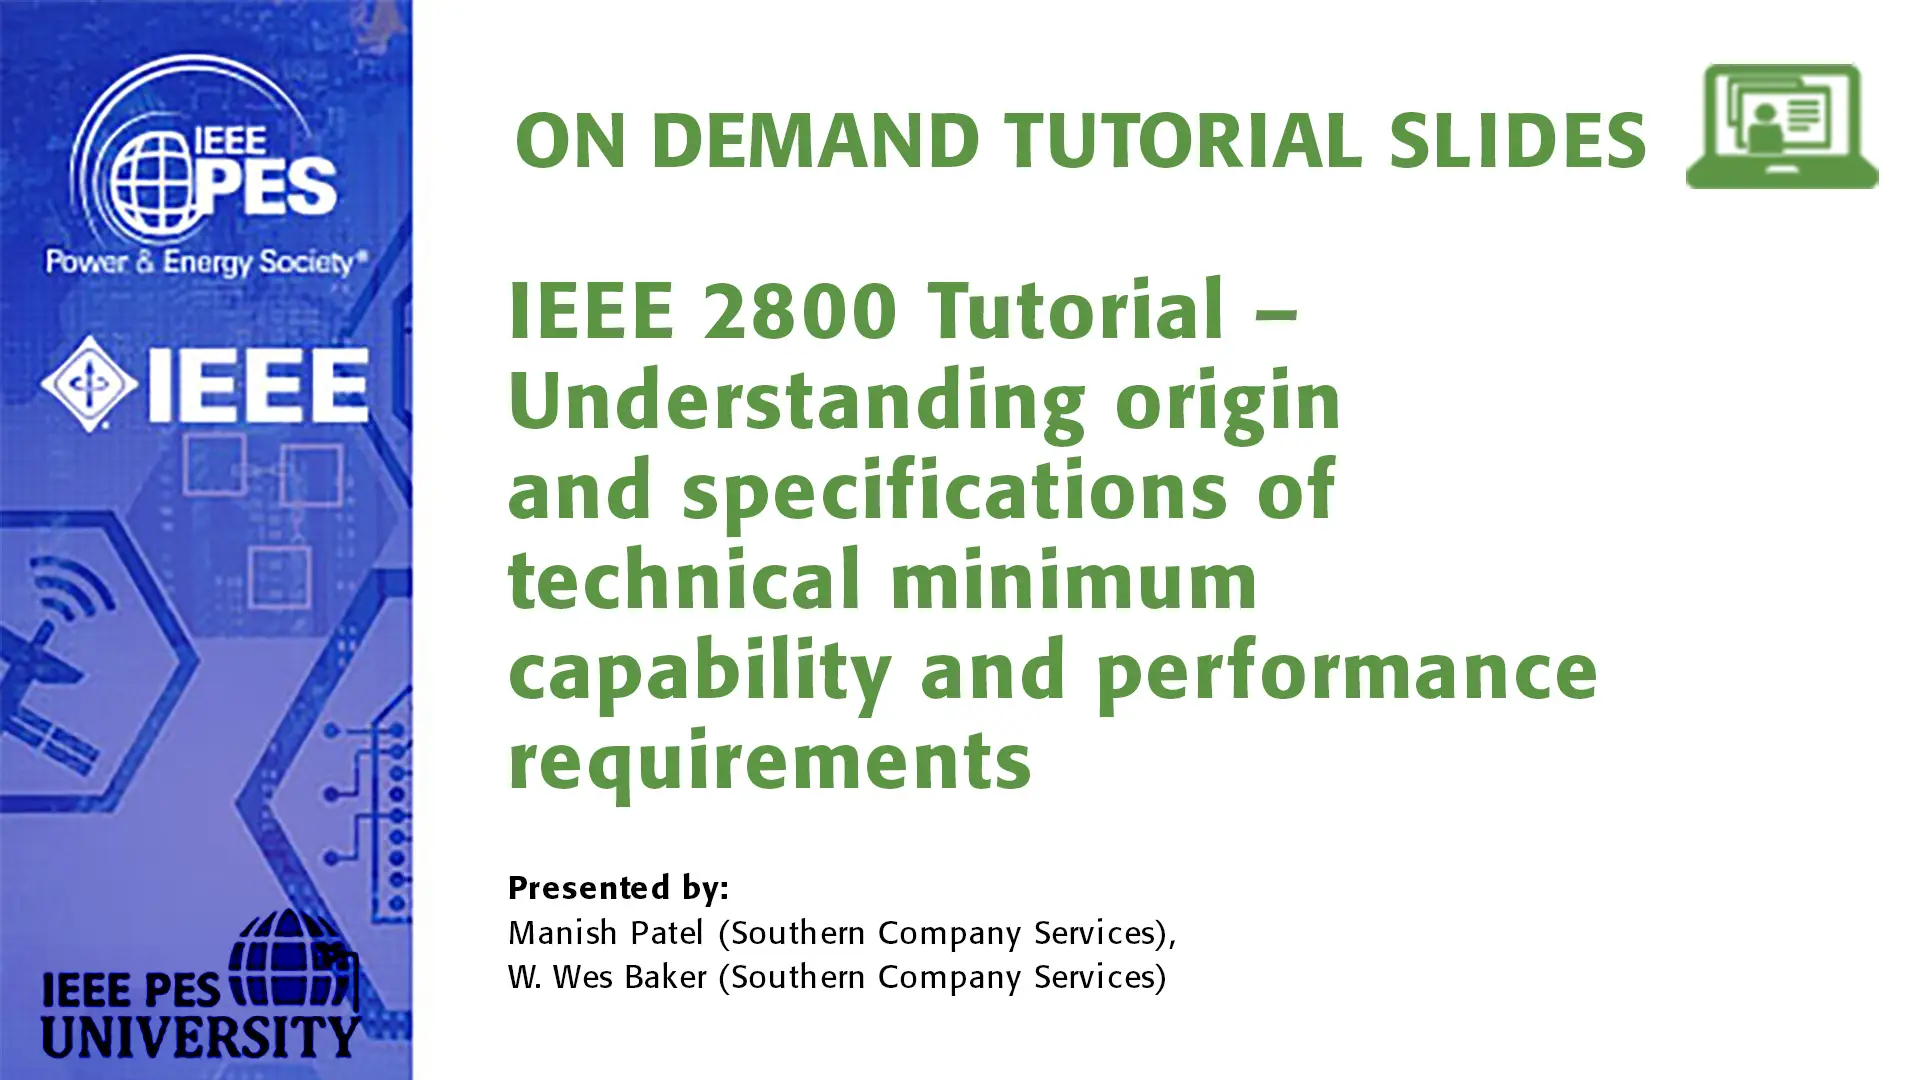 GM 24 Tutorial - IEEE 2800 Tutorial – Understanding Origin and Specifications of Technical Minimum Capability and Performance Requirements (Slides)